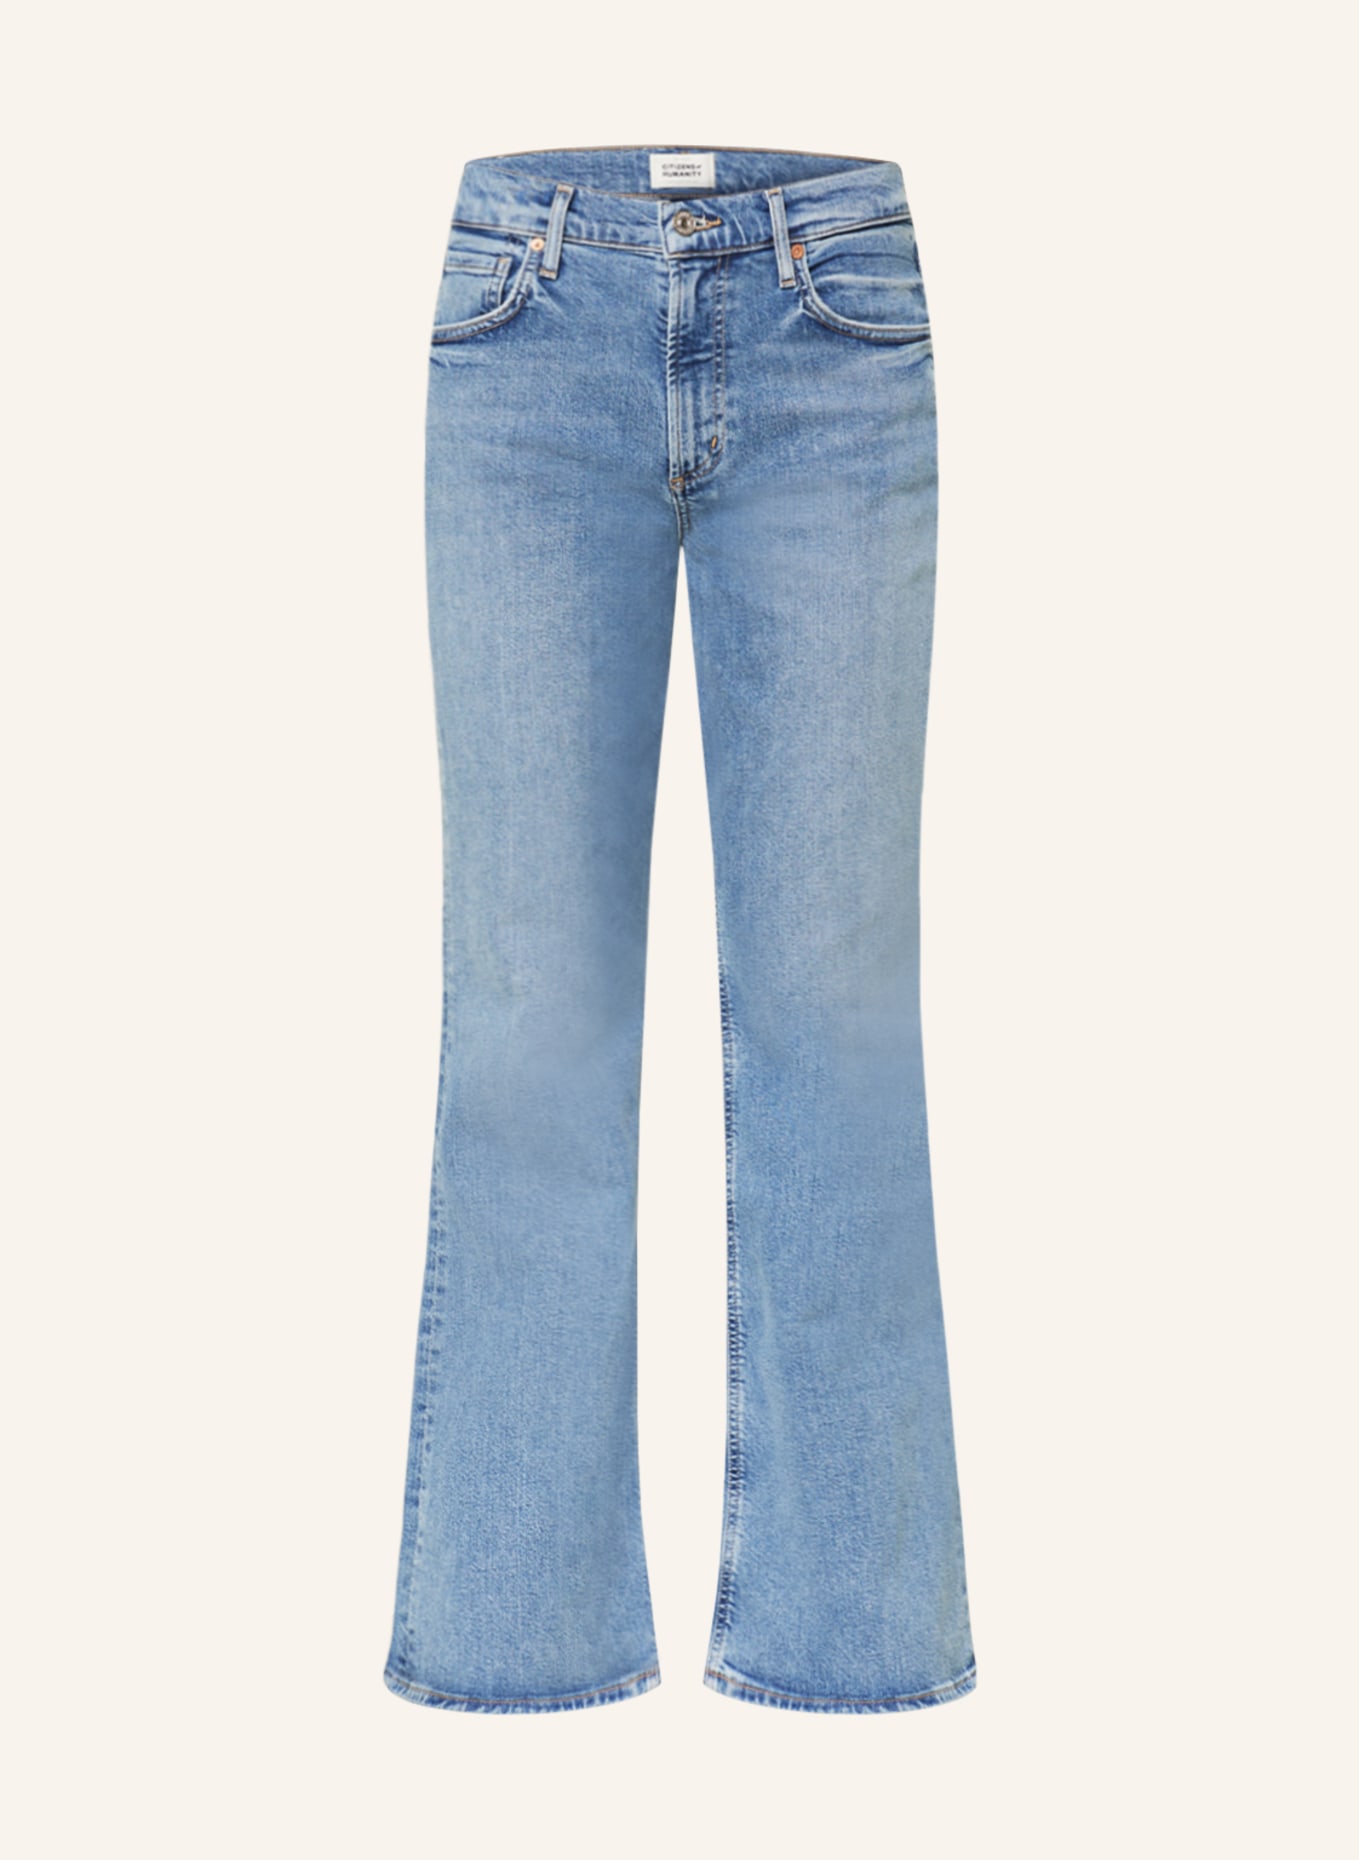 CITIZENS of HUMANITY Flared jeans ISOLA, Color: Pegasus md indigo (Image 1)